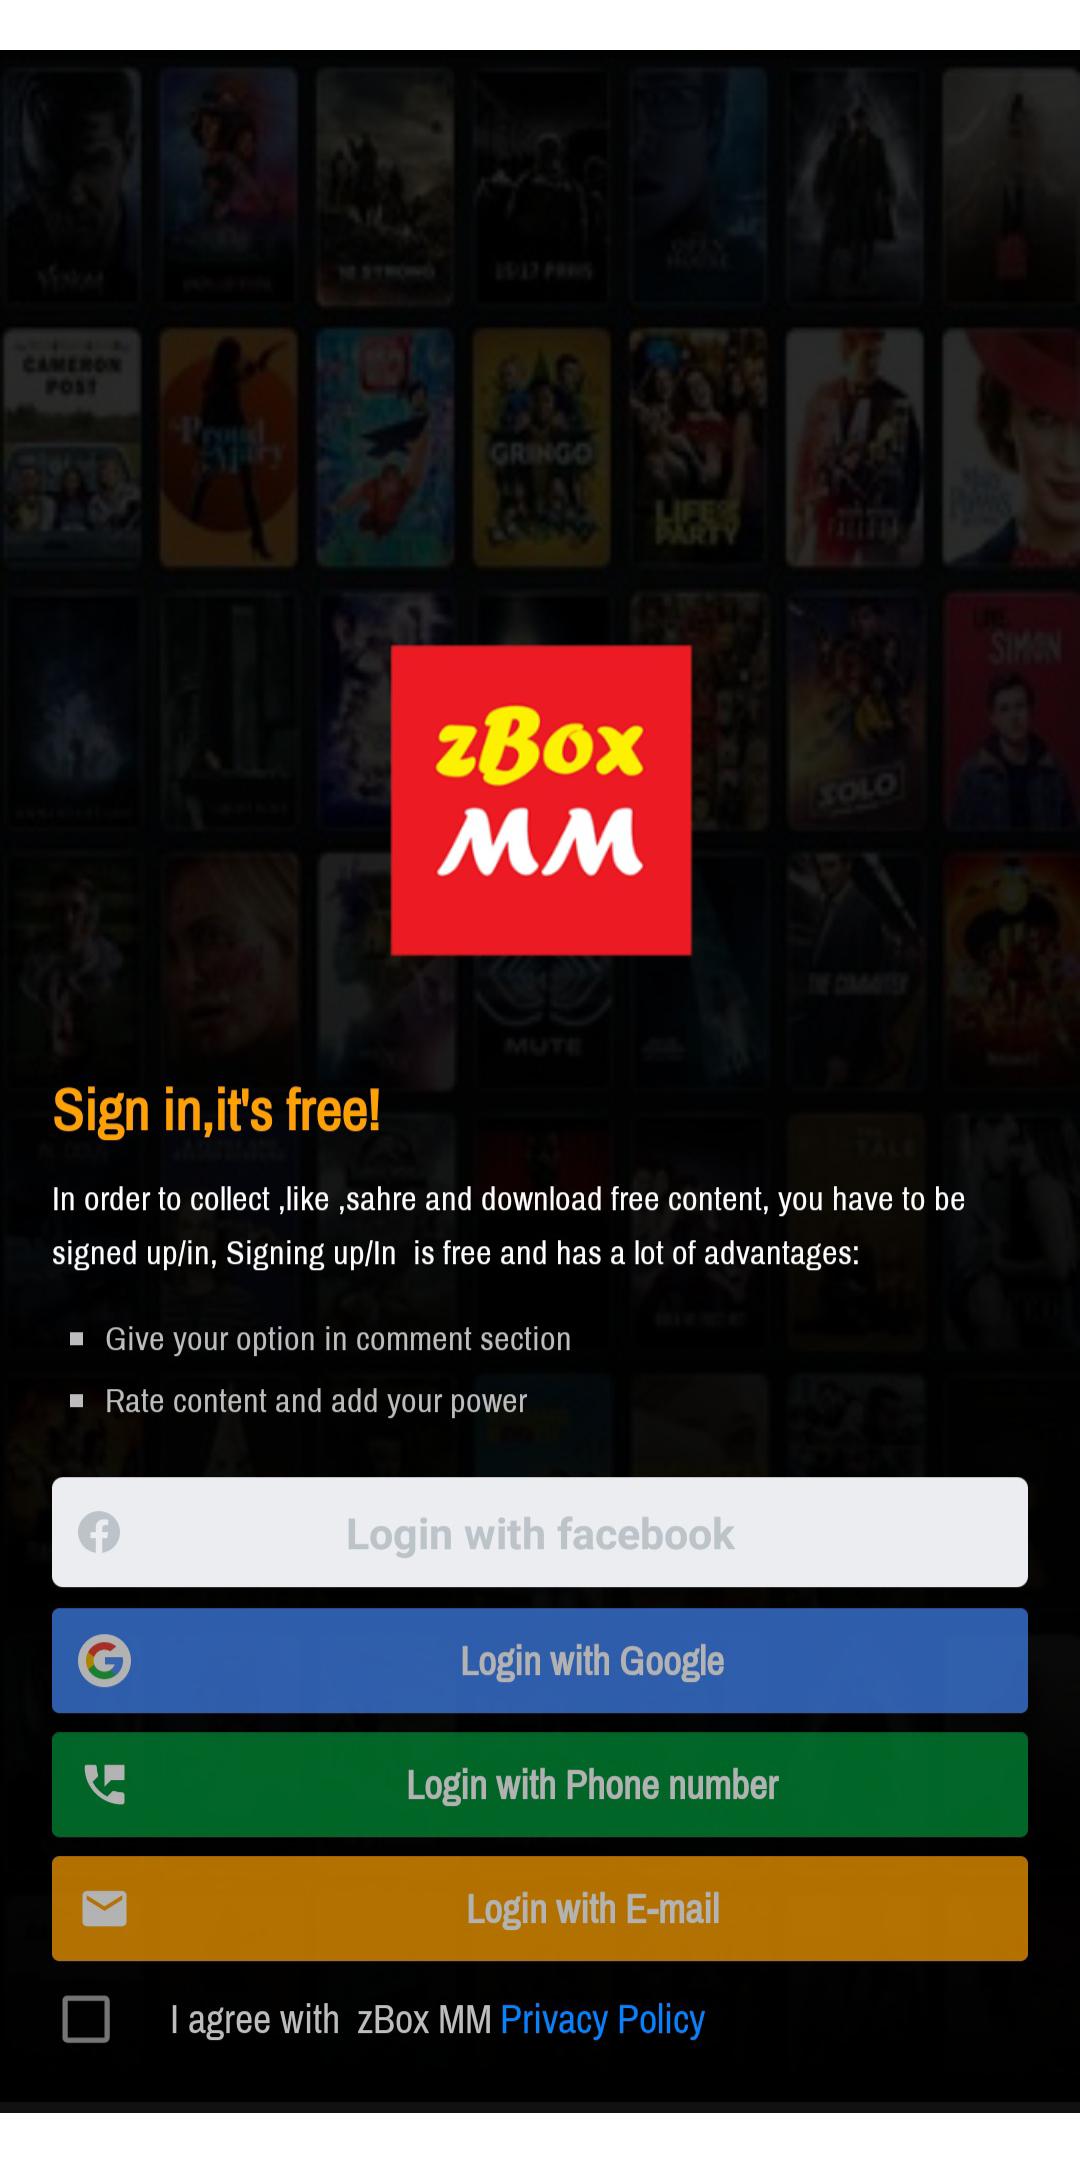 zBox MM - For Myanmar